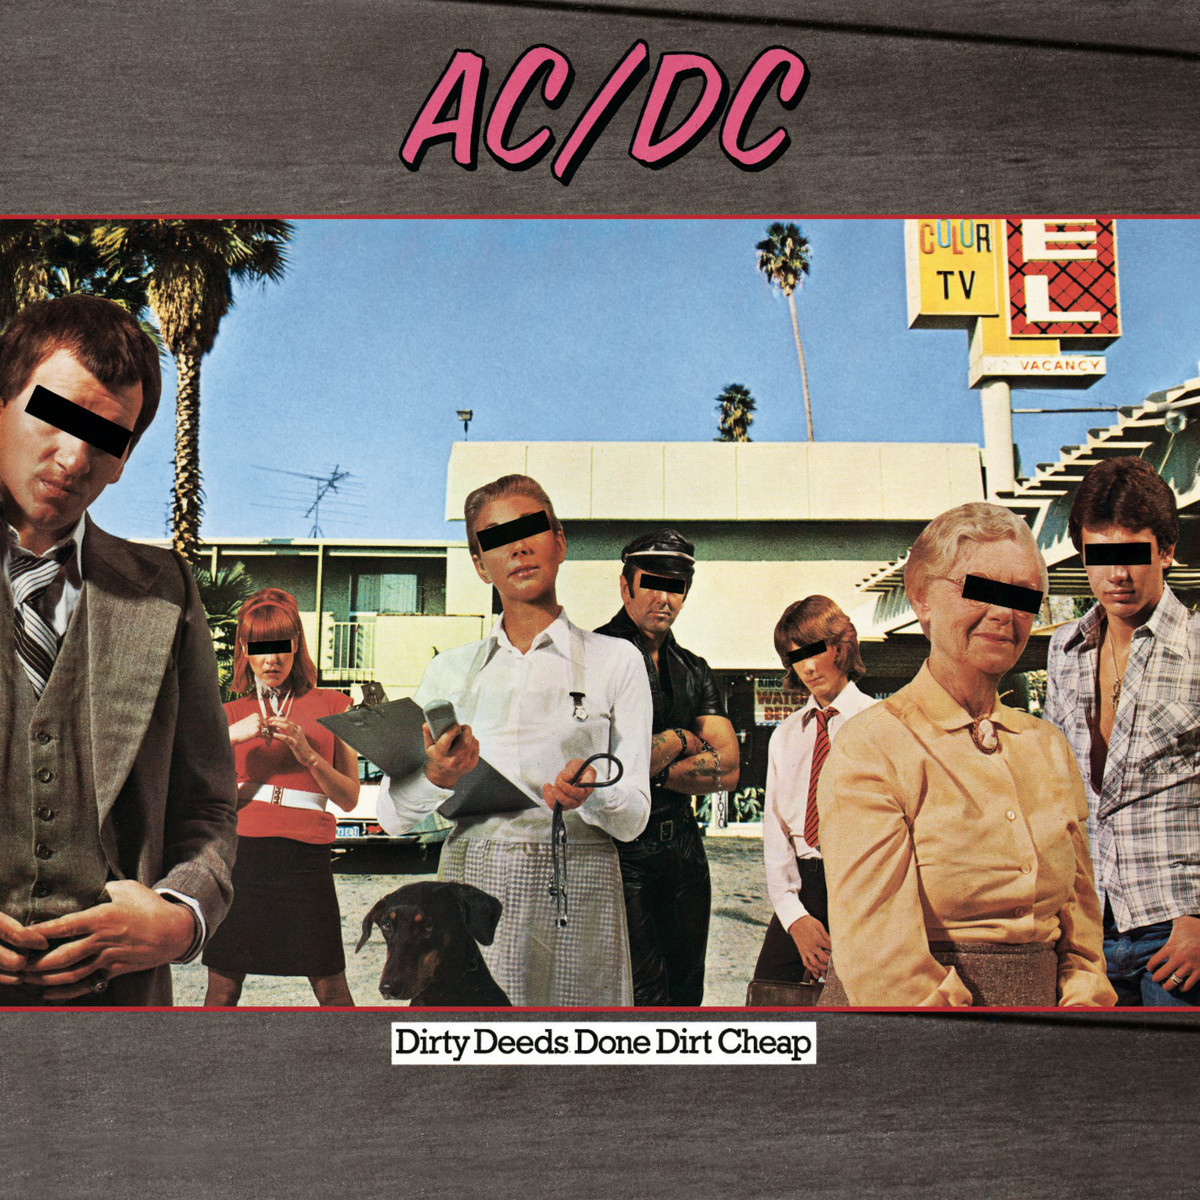 ACDC - Dirty Deeds Done Dity Cheap